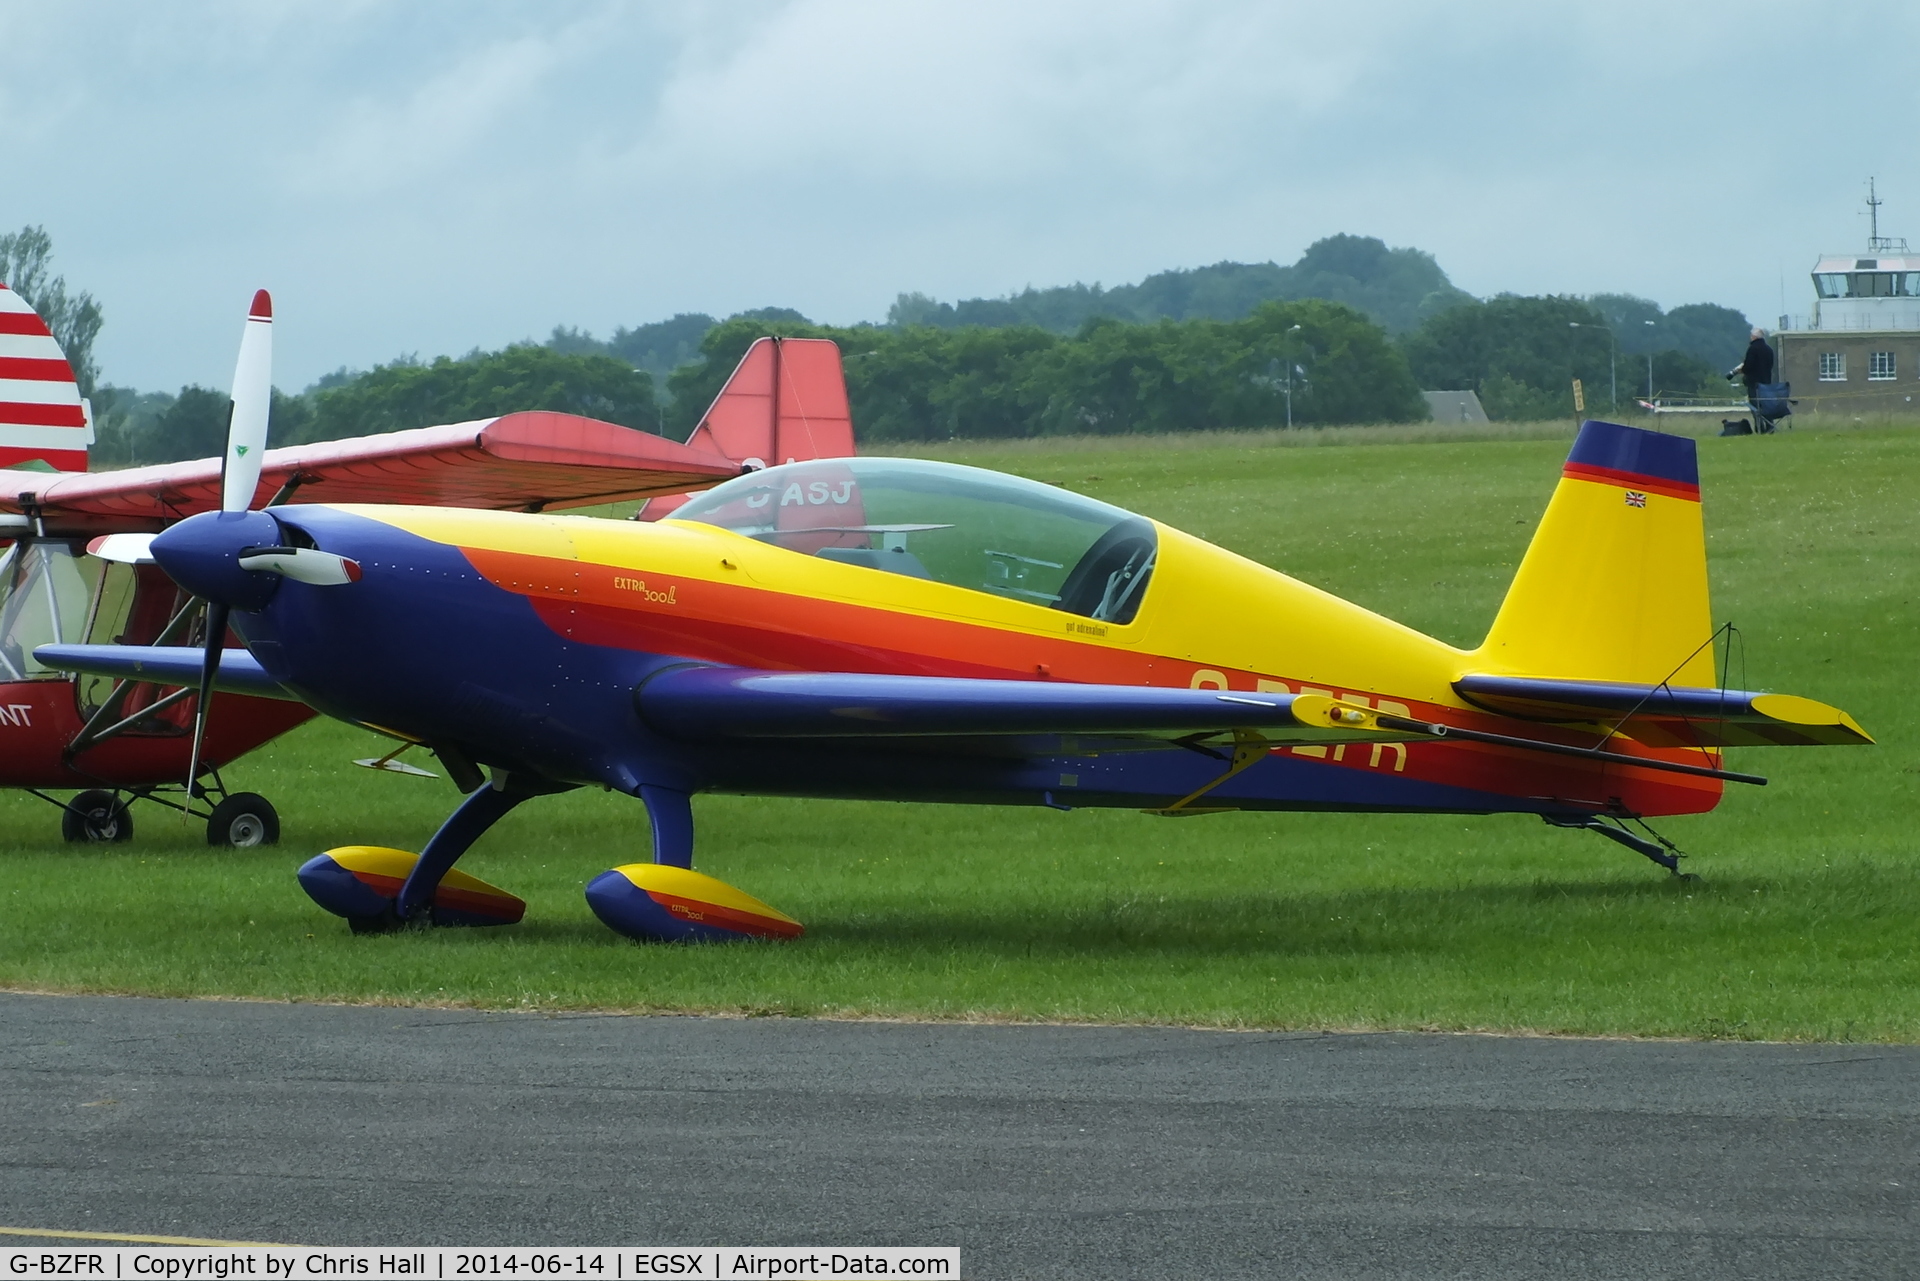 G-BZFR, 2000 Extra EA-300L C/N 203, at the Air Britain fly in